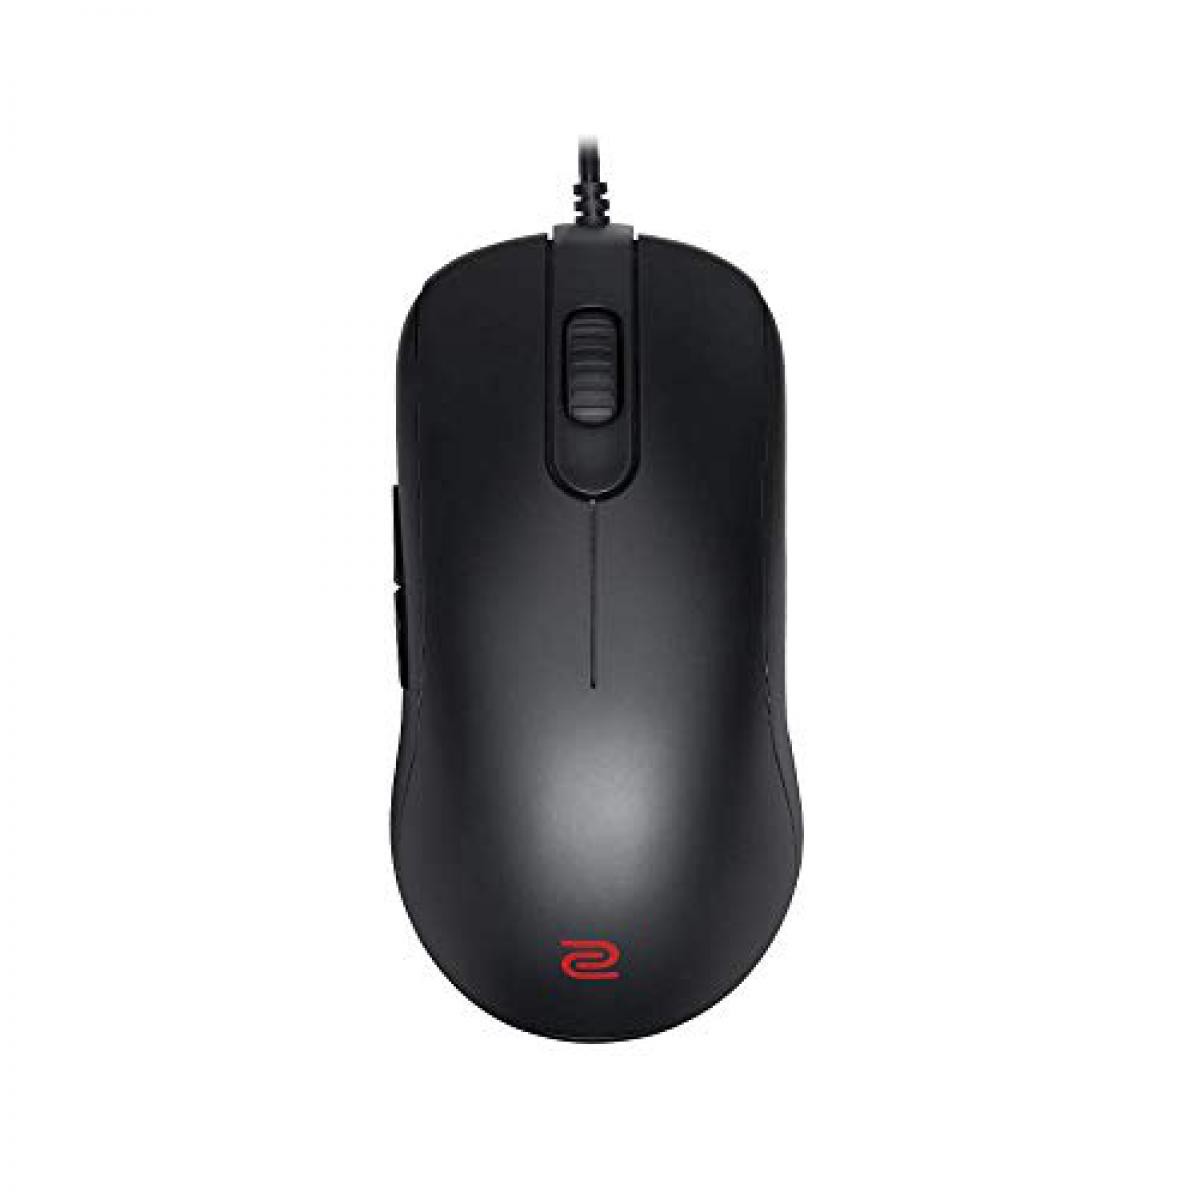 Zowie - ZOWIE GEAR MOUSE FK2-B Middle size Droitier *9H.N23BB.A2E*8231 - Souris